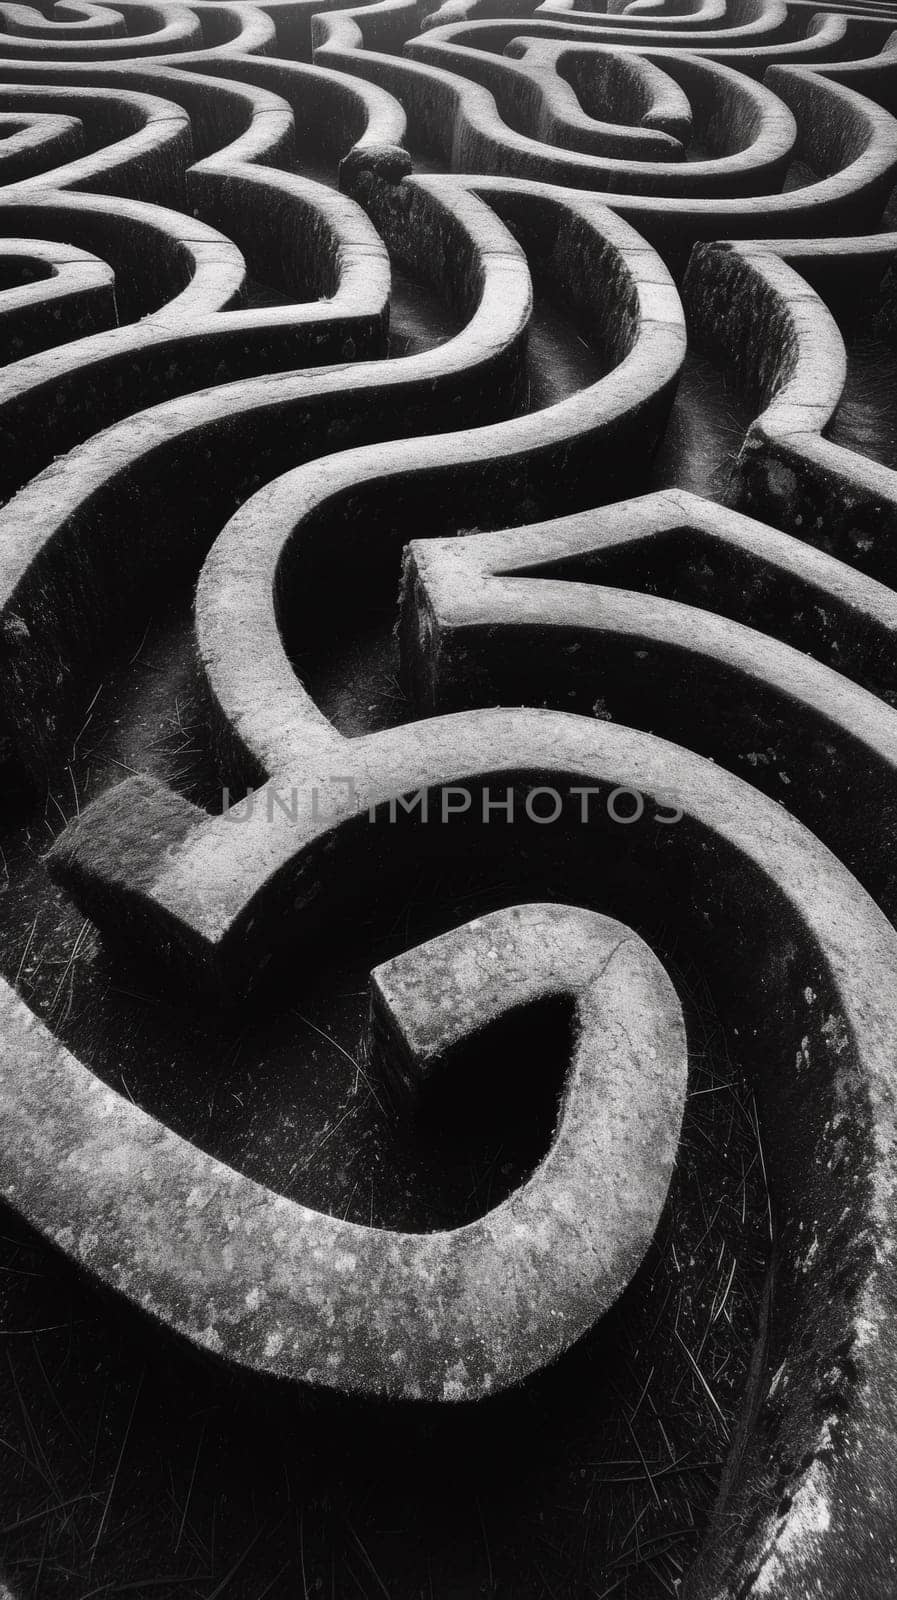 A black and white photo of a maze with many twists